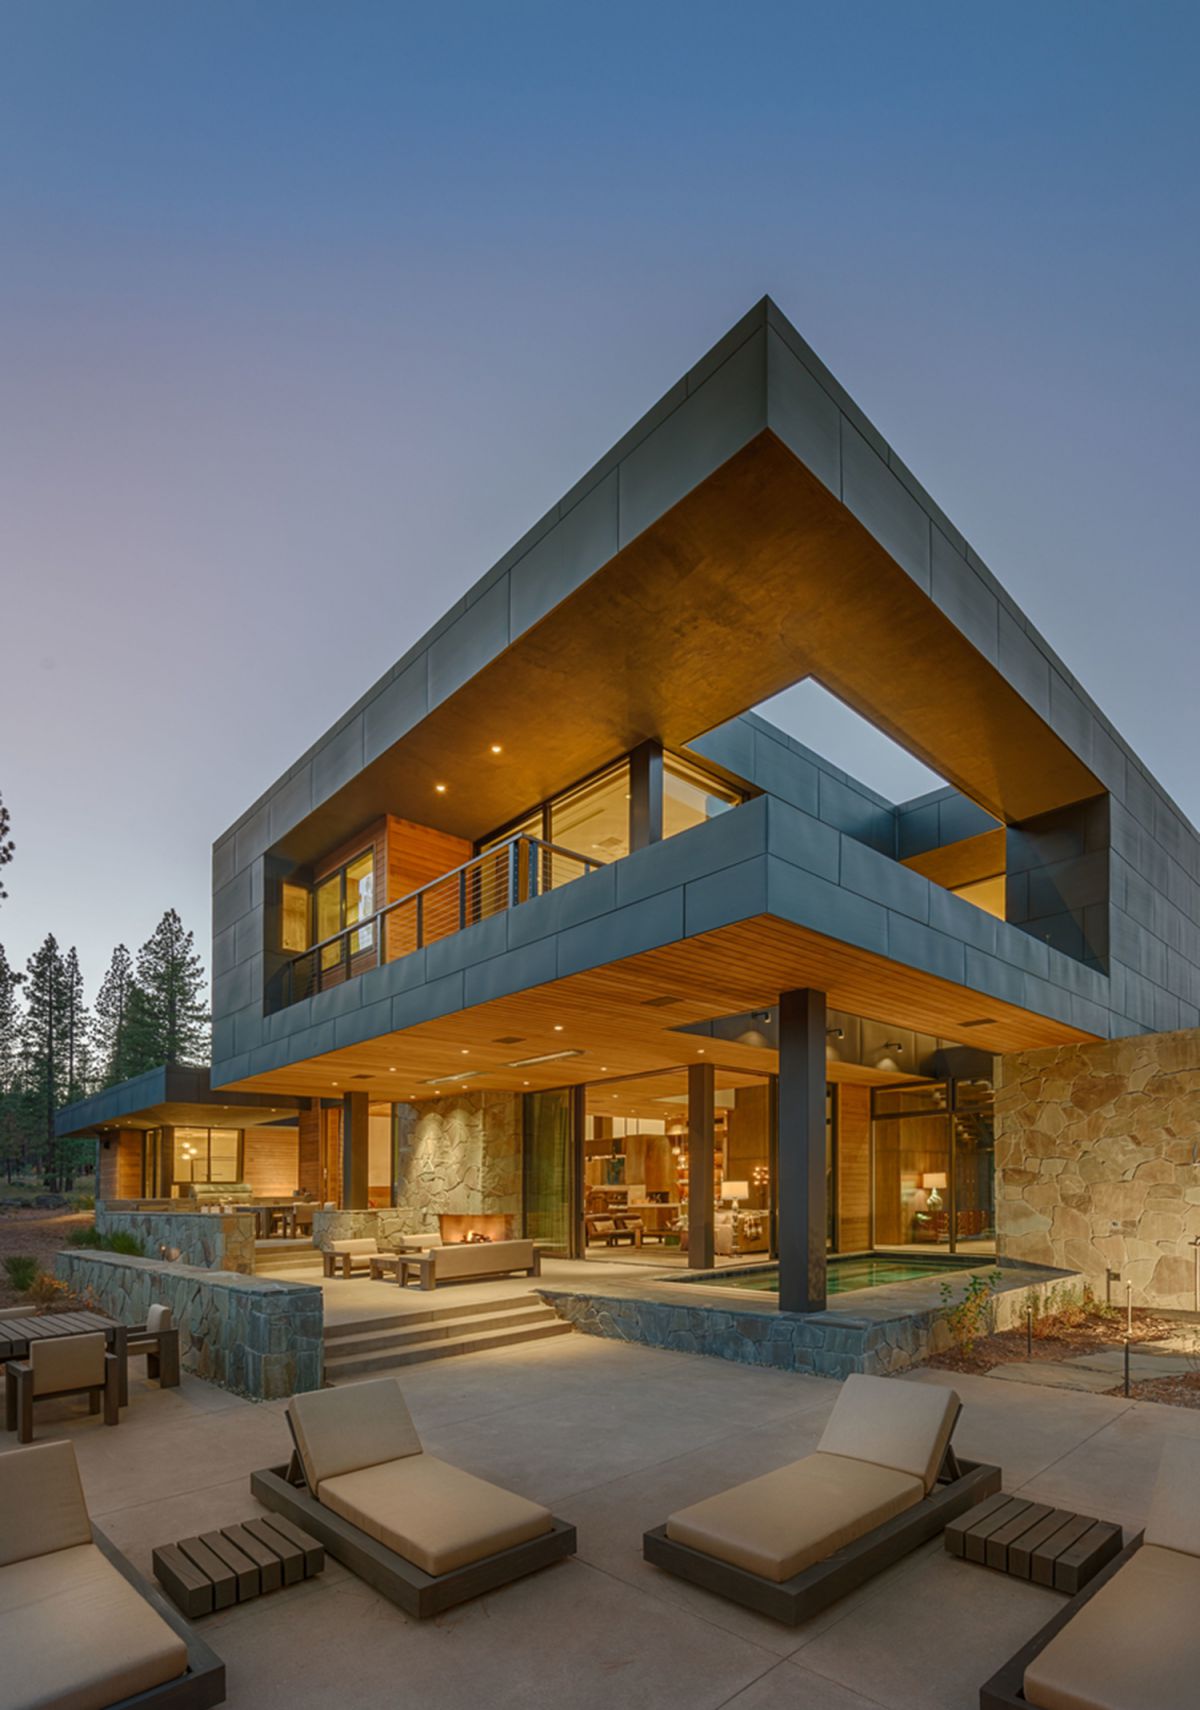 Martis-Camp-Residence-403-in-Truckee-CA-by-Marmol-Radziner-Architecture-3